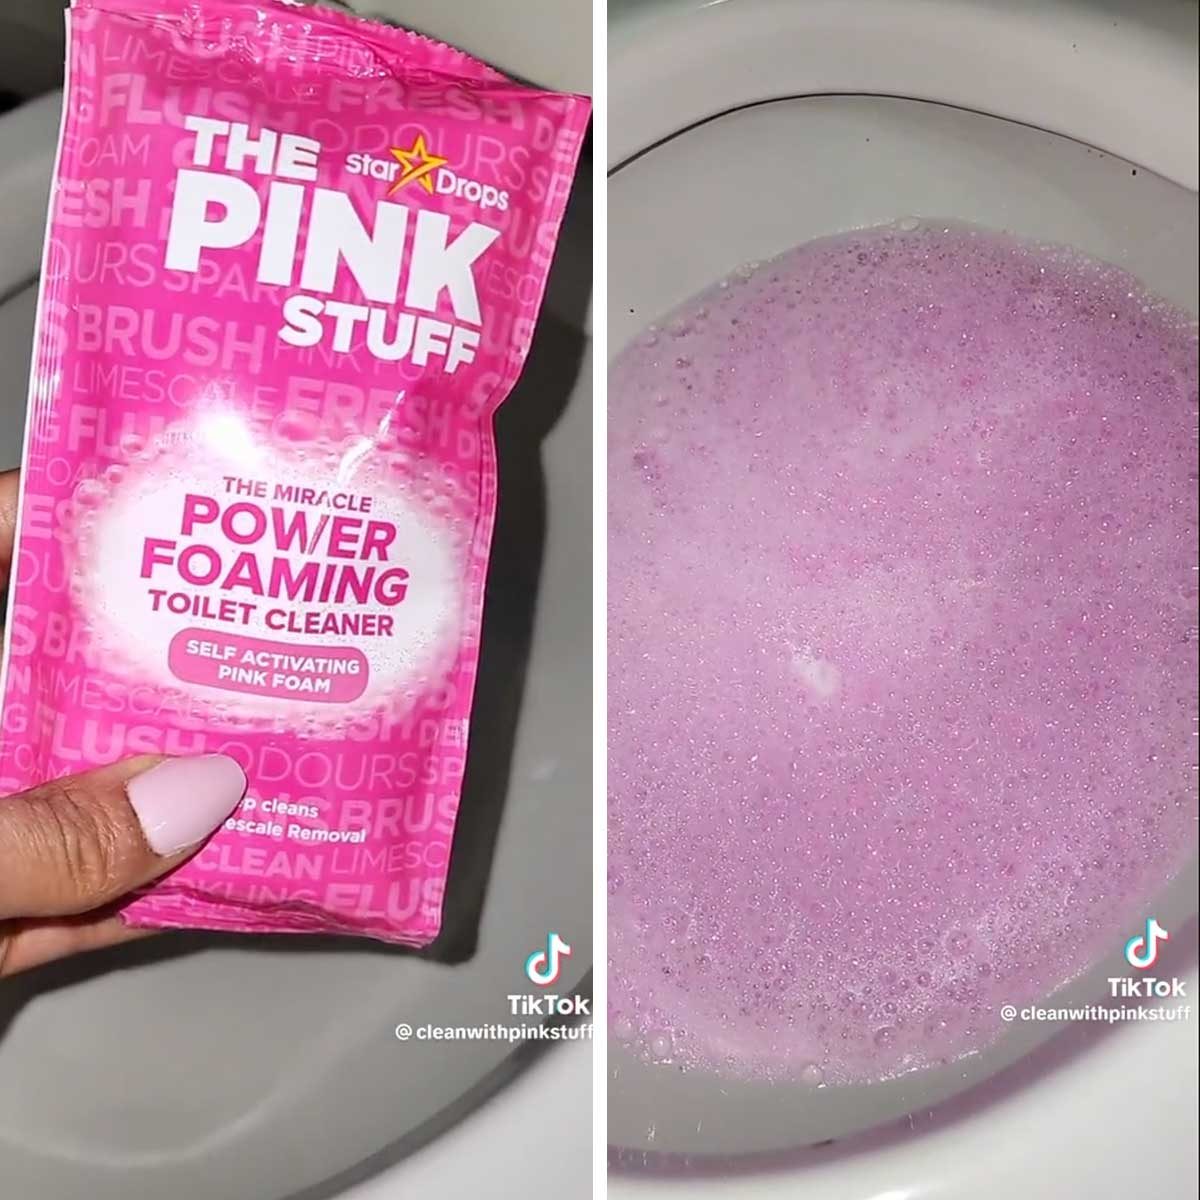 Tik Tok star fills her toilet to the brim with cleaning products